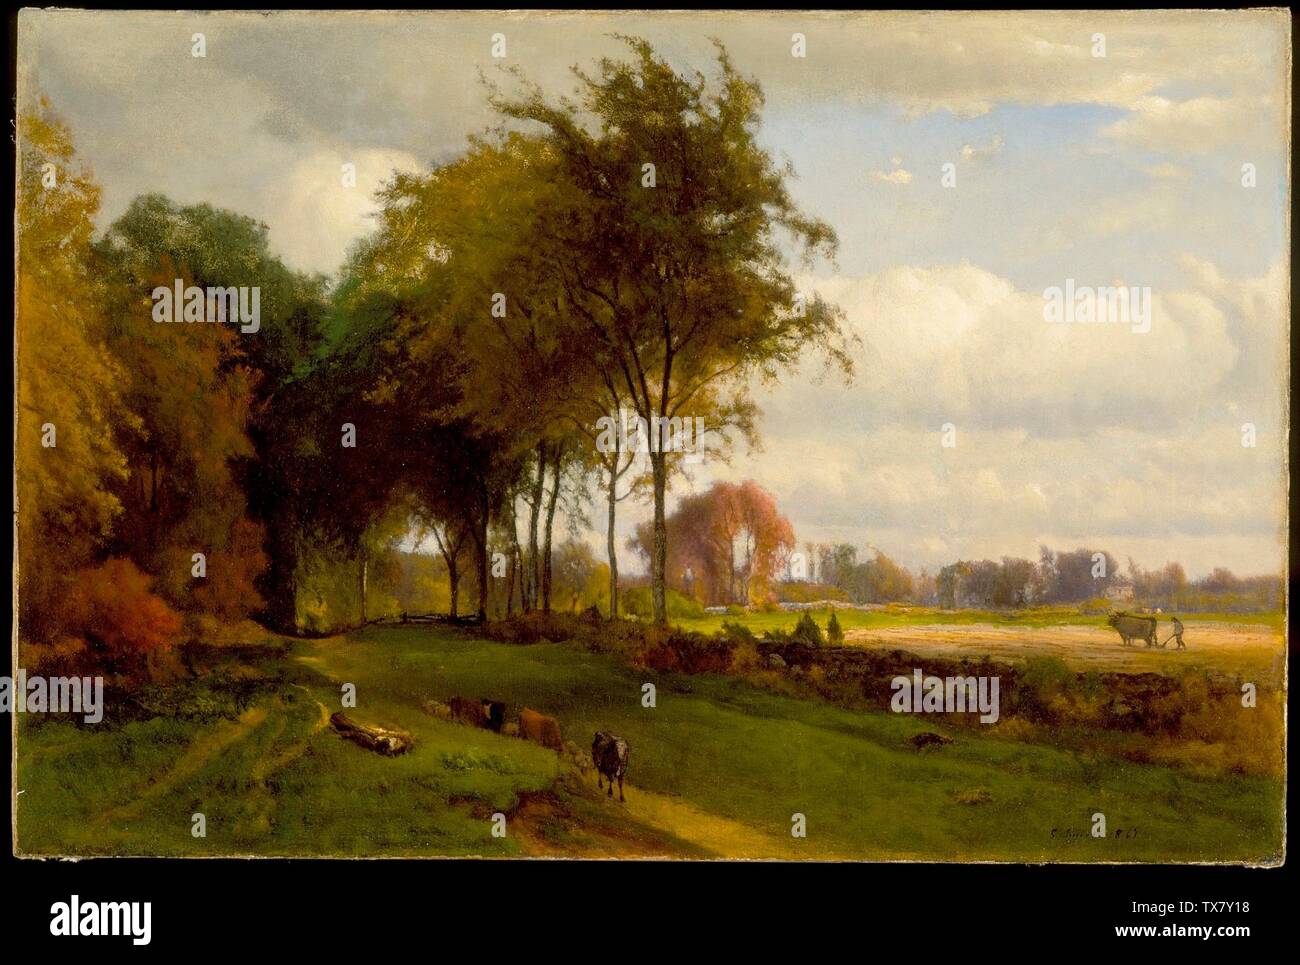 Landscape with Cattle (image 2 of 2);  United States, 1869 Paintings Oil on canvas 20 x 30 in. (50.8 x 76.2 cm) Gift of Dr. and Mrs. Christian Title (M.91.309.2) American Art Currently on public view: Art of the Americas Building, floor 3; 1869date QS:P571,+1869-00-00T00:00:00Z/9; Stock Photo